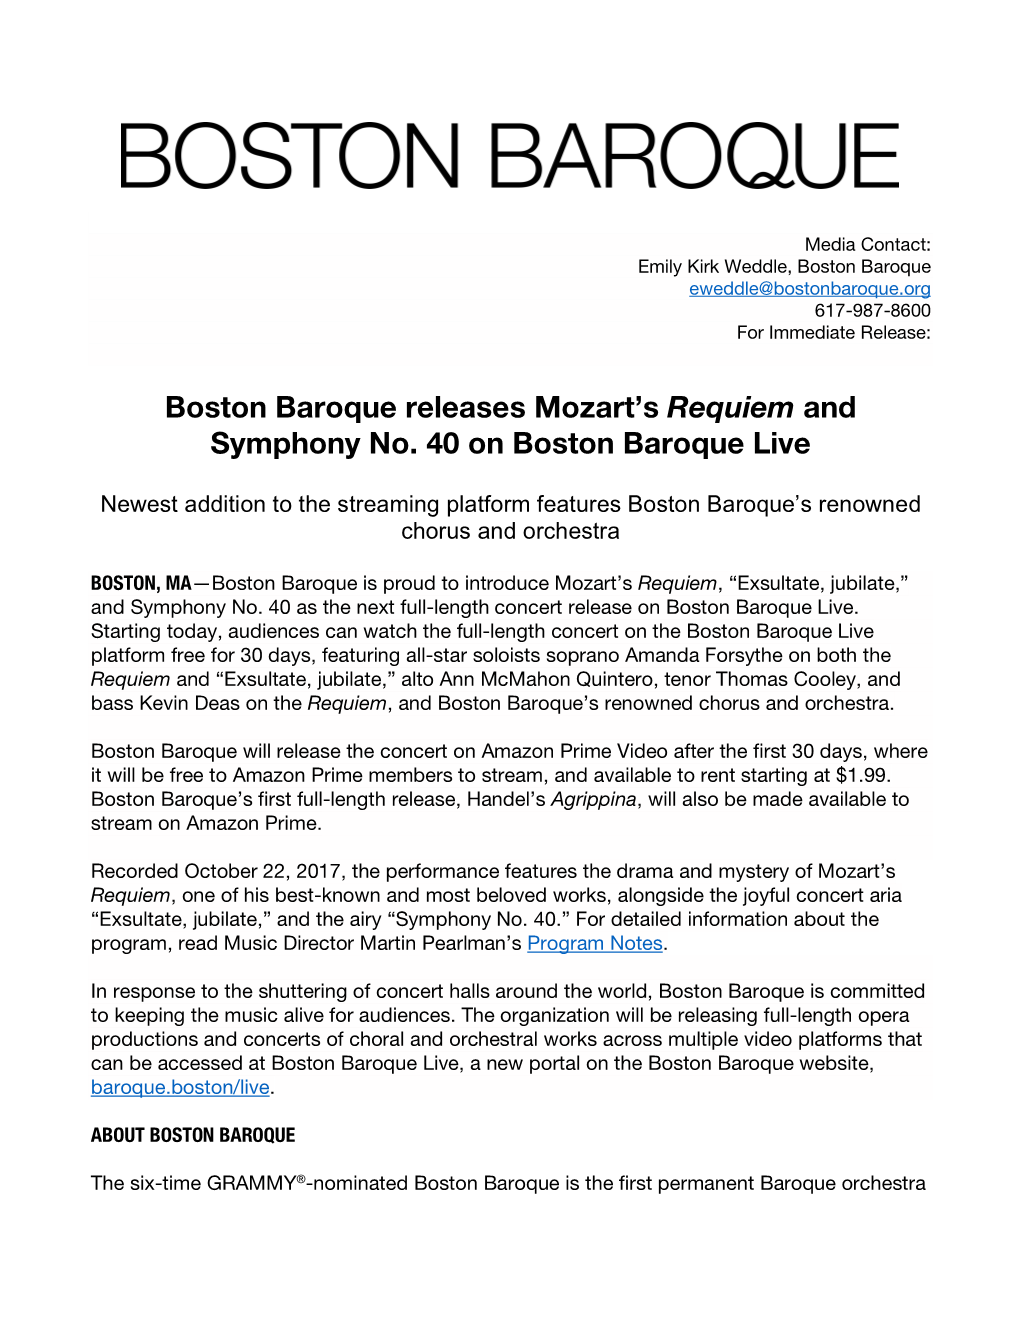 Boston Baroque Releases Mozart's Requiem and Symphony No. 40 On